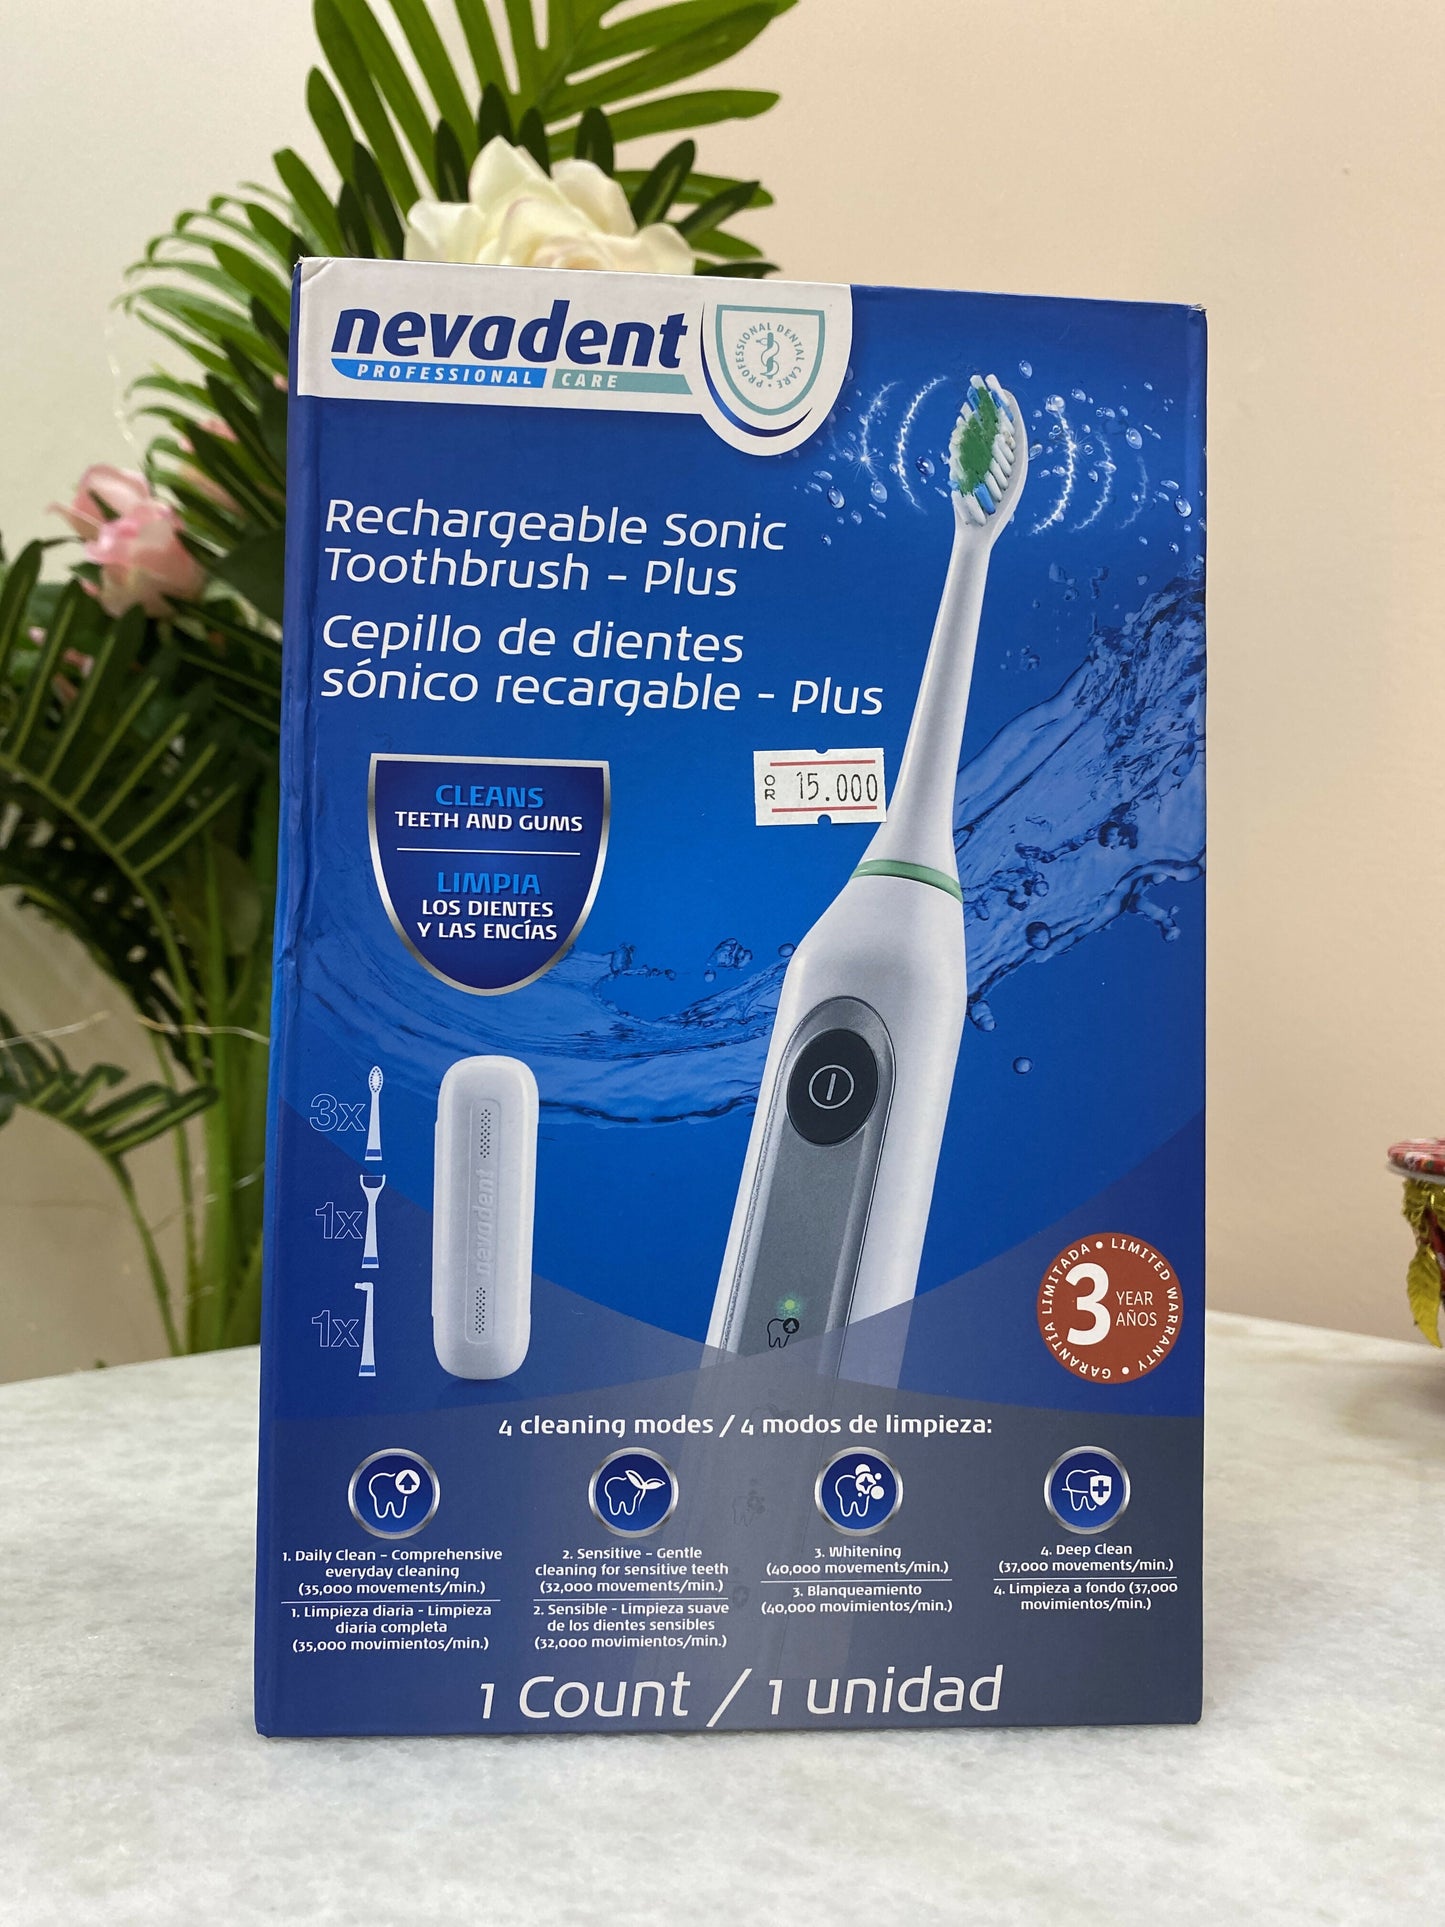 RECHARGEABLE SONIC TOOTHBRUSH PLUS